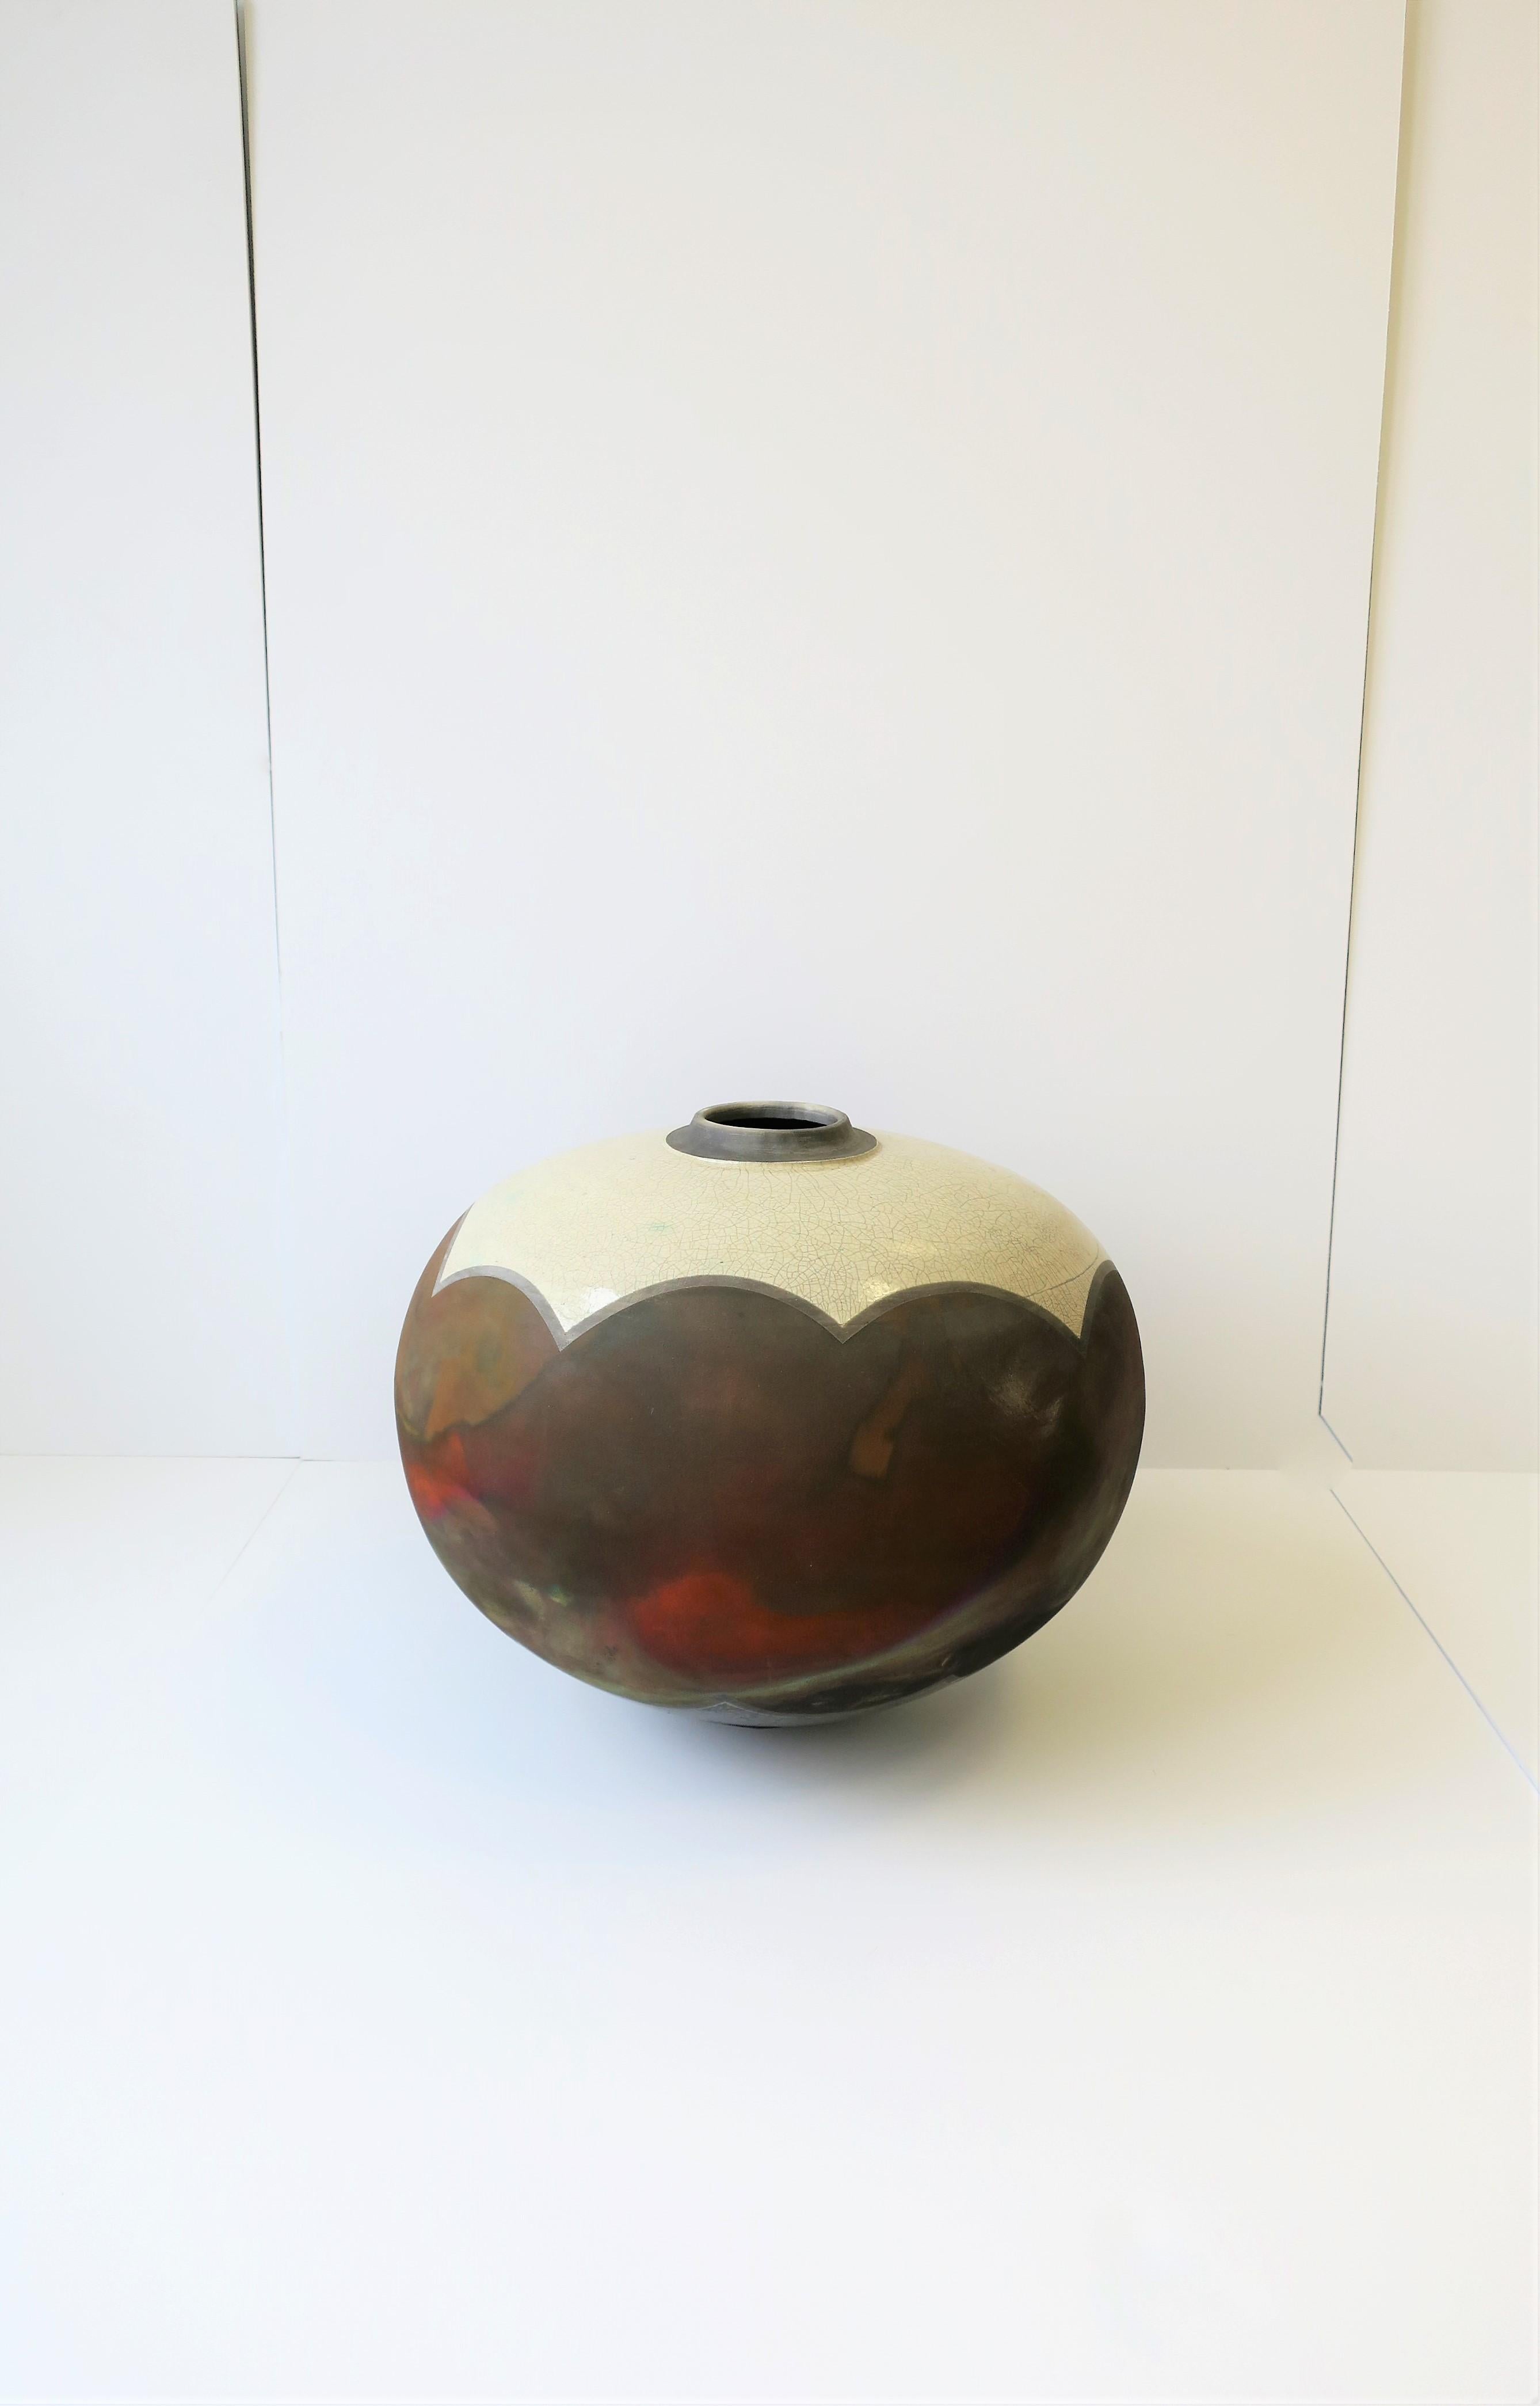 A beautiful, relatively large, round studio pottery vessel or vase, circa 1960s-1970s. Vessel is part glazed and unglazed with 'crackle' at top, matte texture at centre with vibrant colors, and iridescence at base. This beautiful combination is